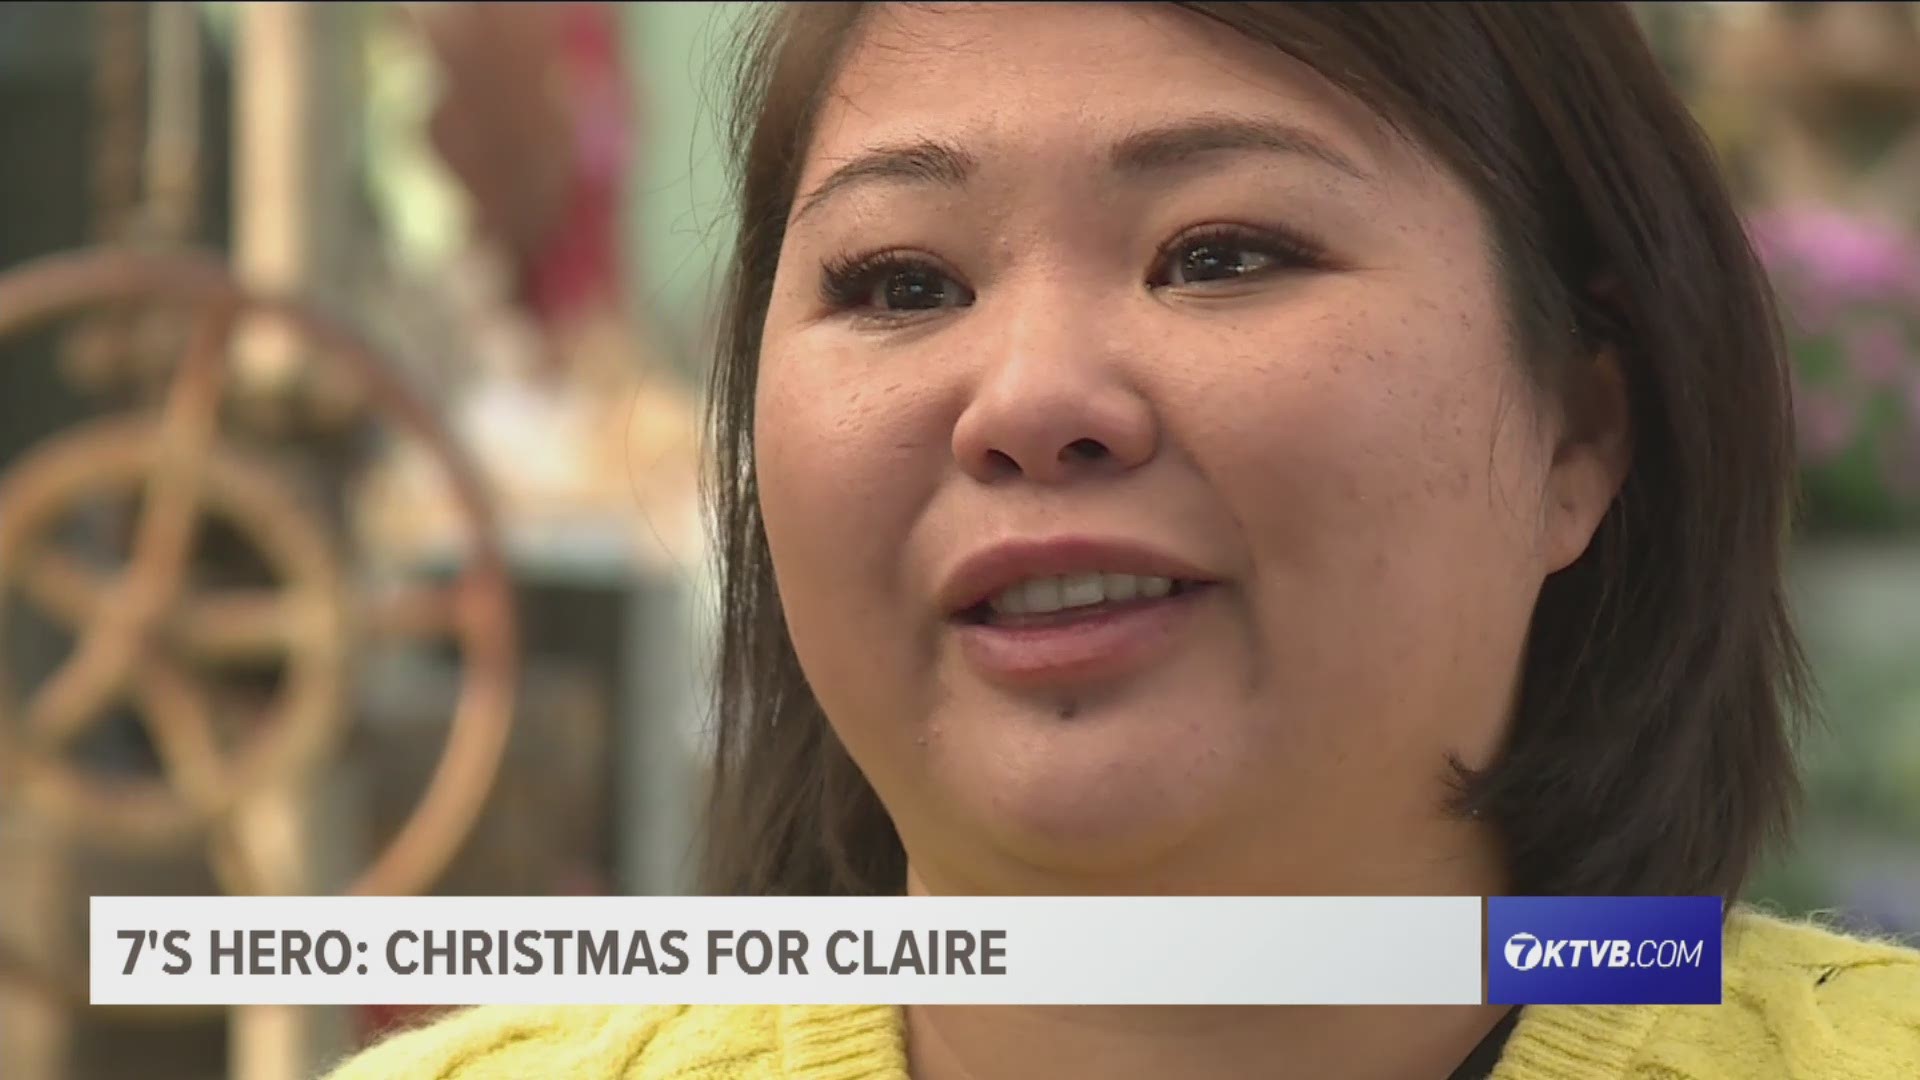 9-year-old Claire Elliott has a deadly brain tumor, and her mom asked for help from her neighbors to celebrate Christmas early. The response was overwhelming.